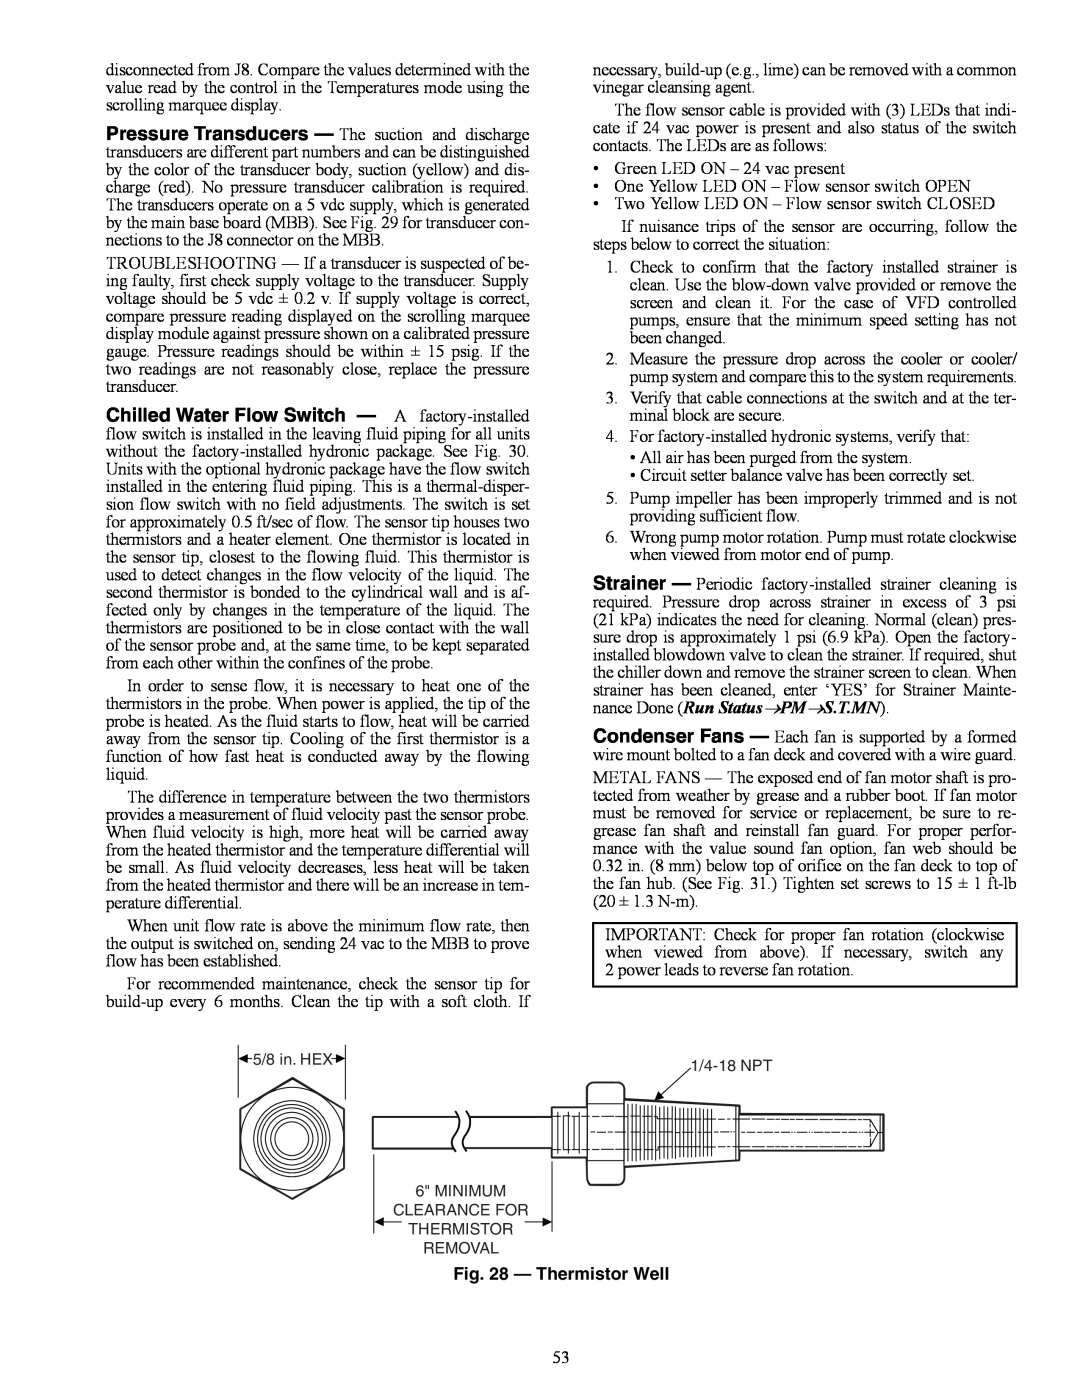 Carrier 30RAP010-060 specifications Thermistor Well 